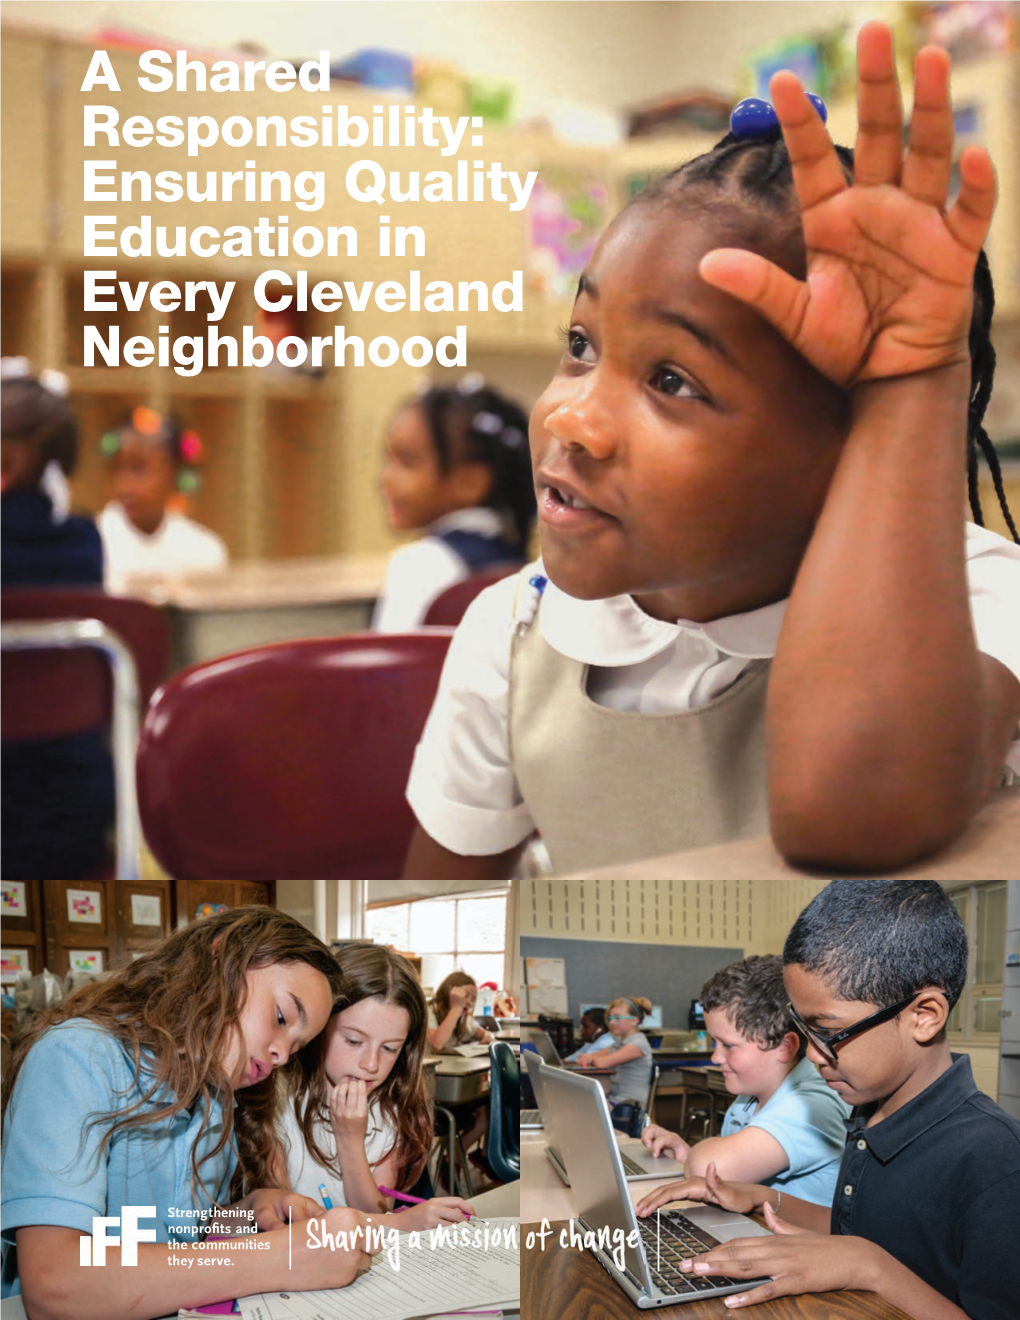 Ensuring Quality Education in Every Cleveland Neighborhood